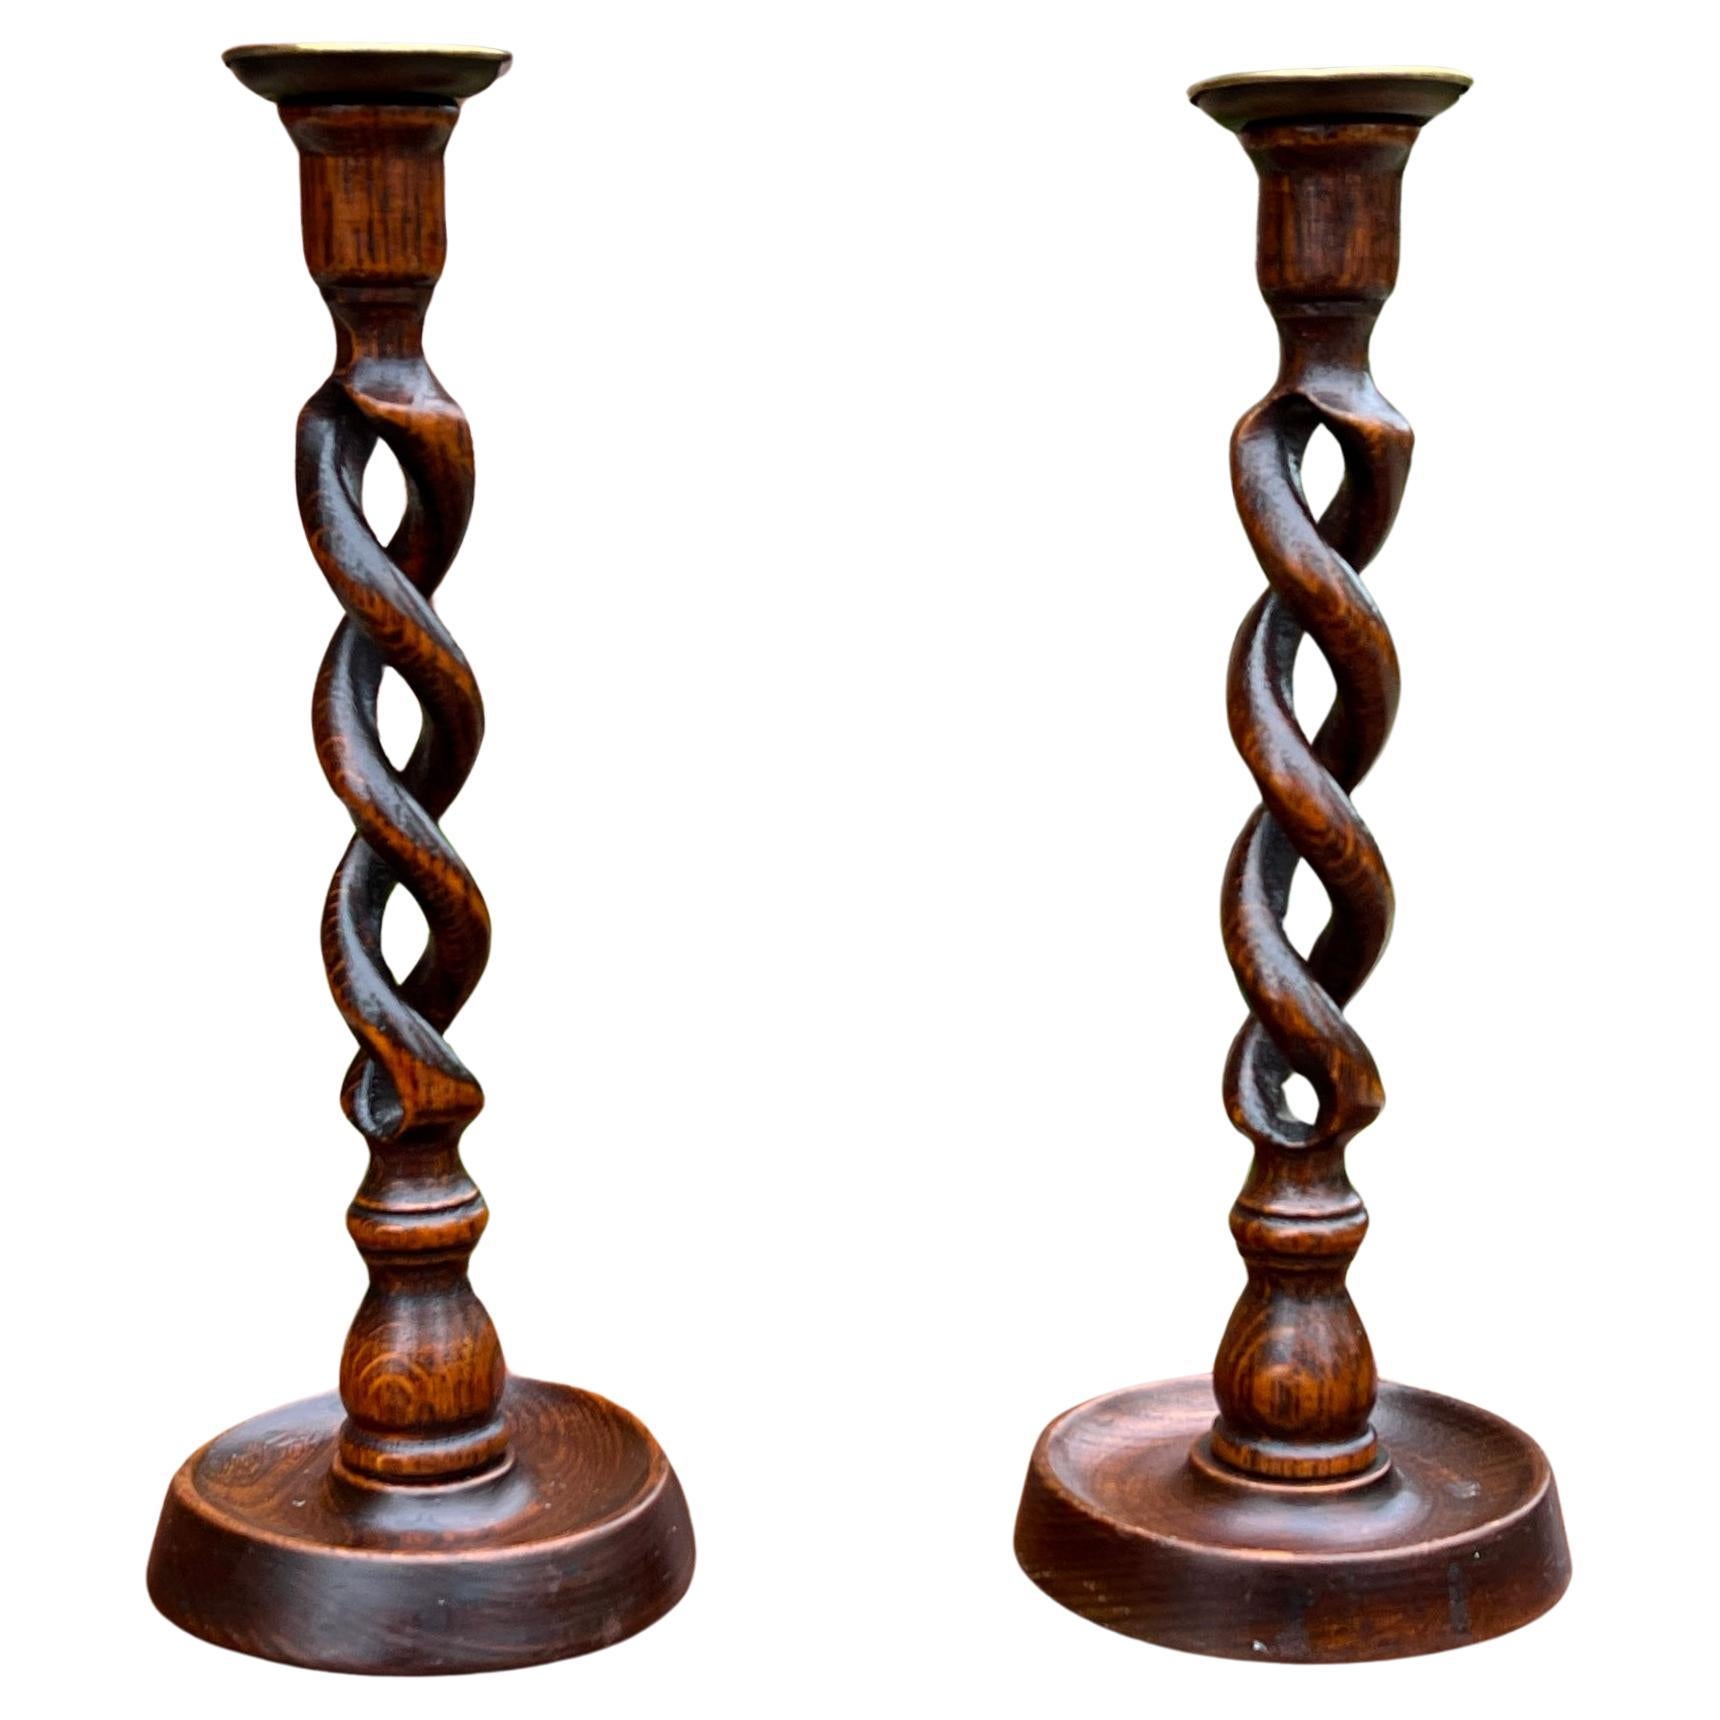 What can I use instead of a candlestick holder?